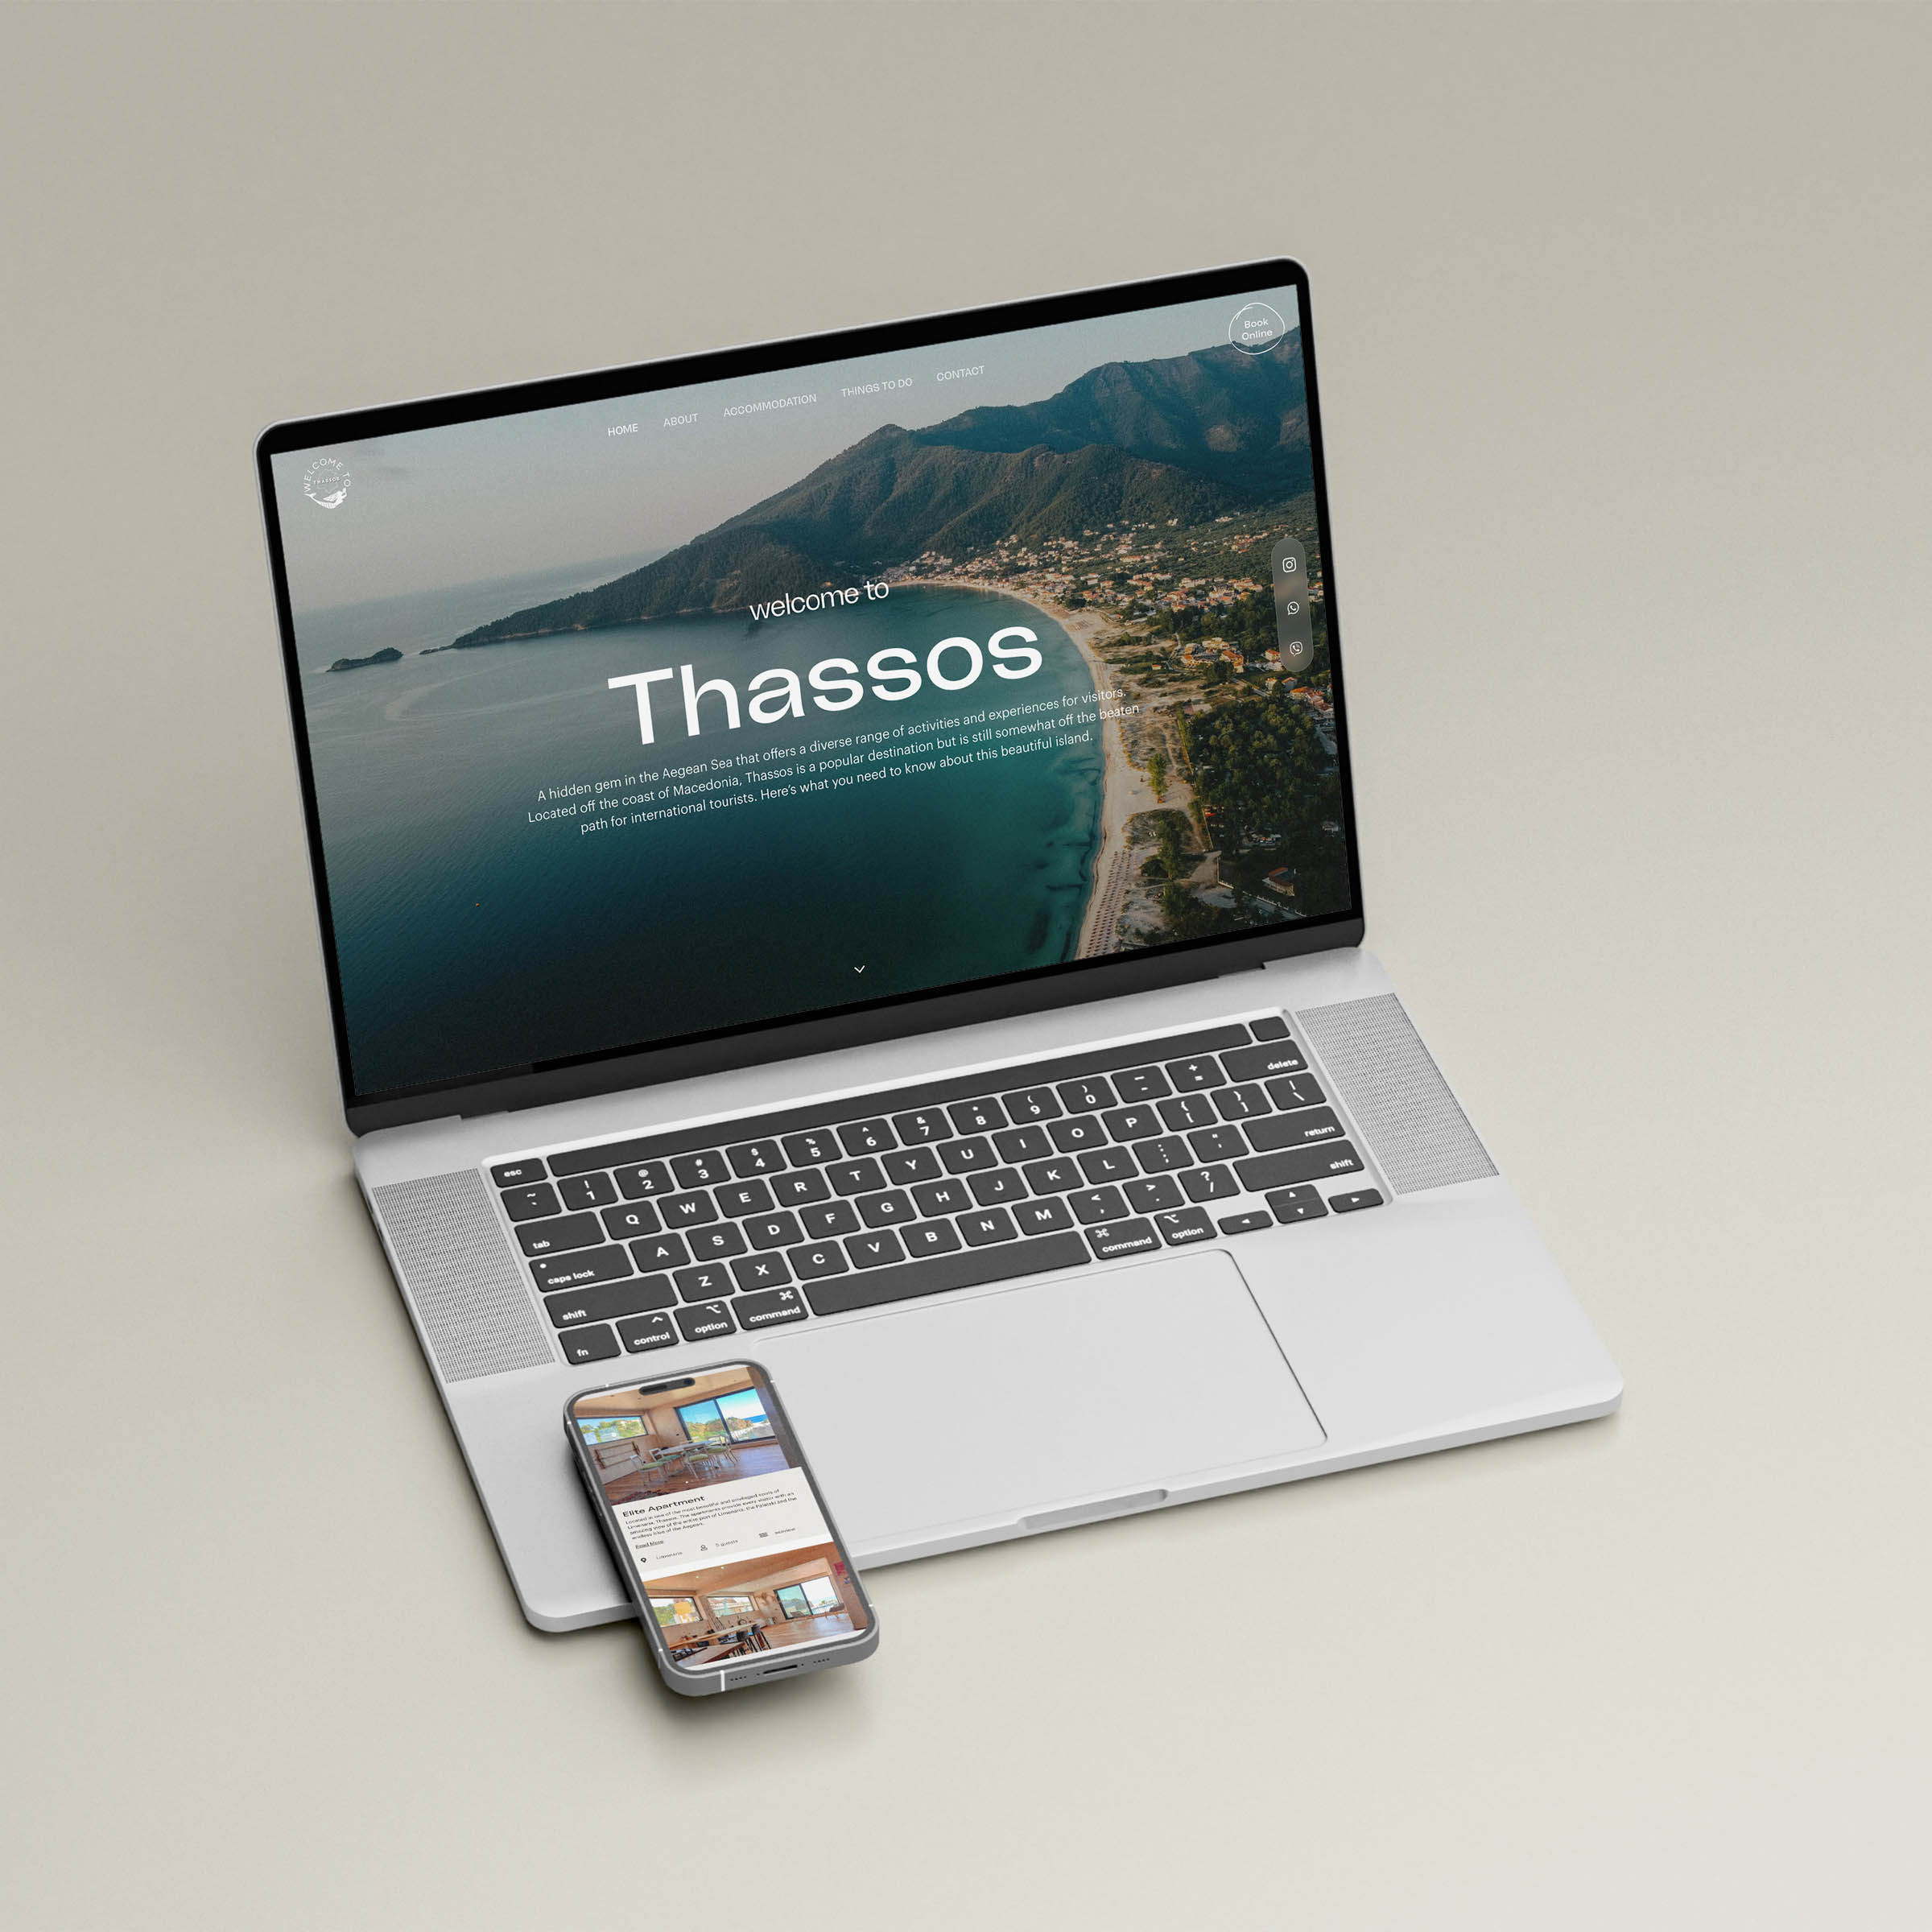 Welcome to Thassos by Solid Studio